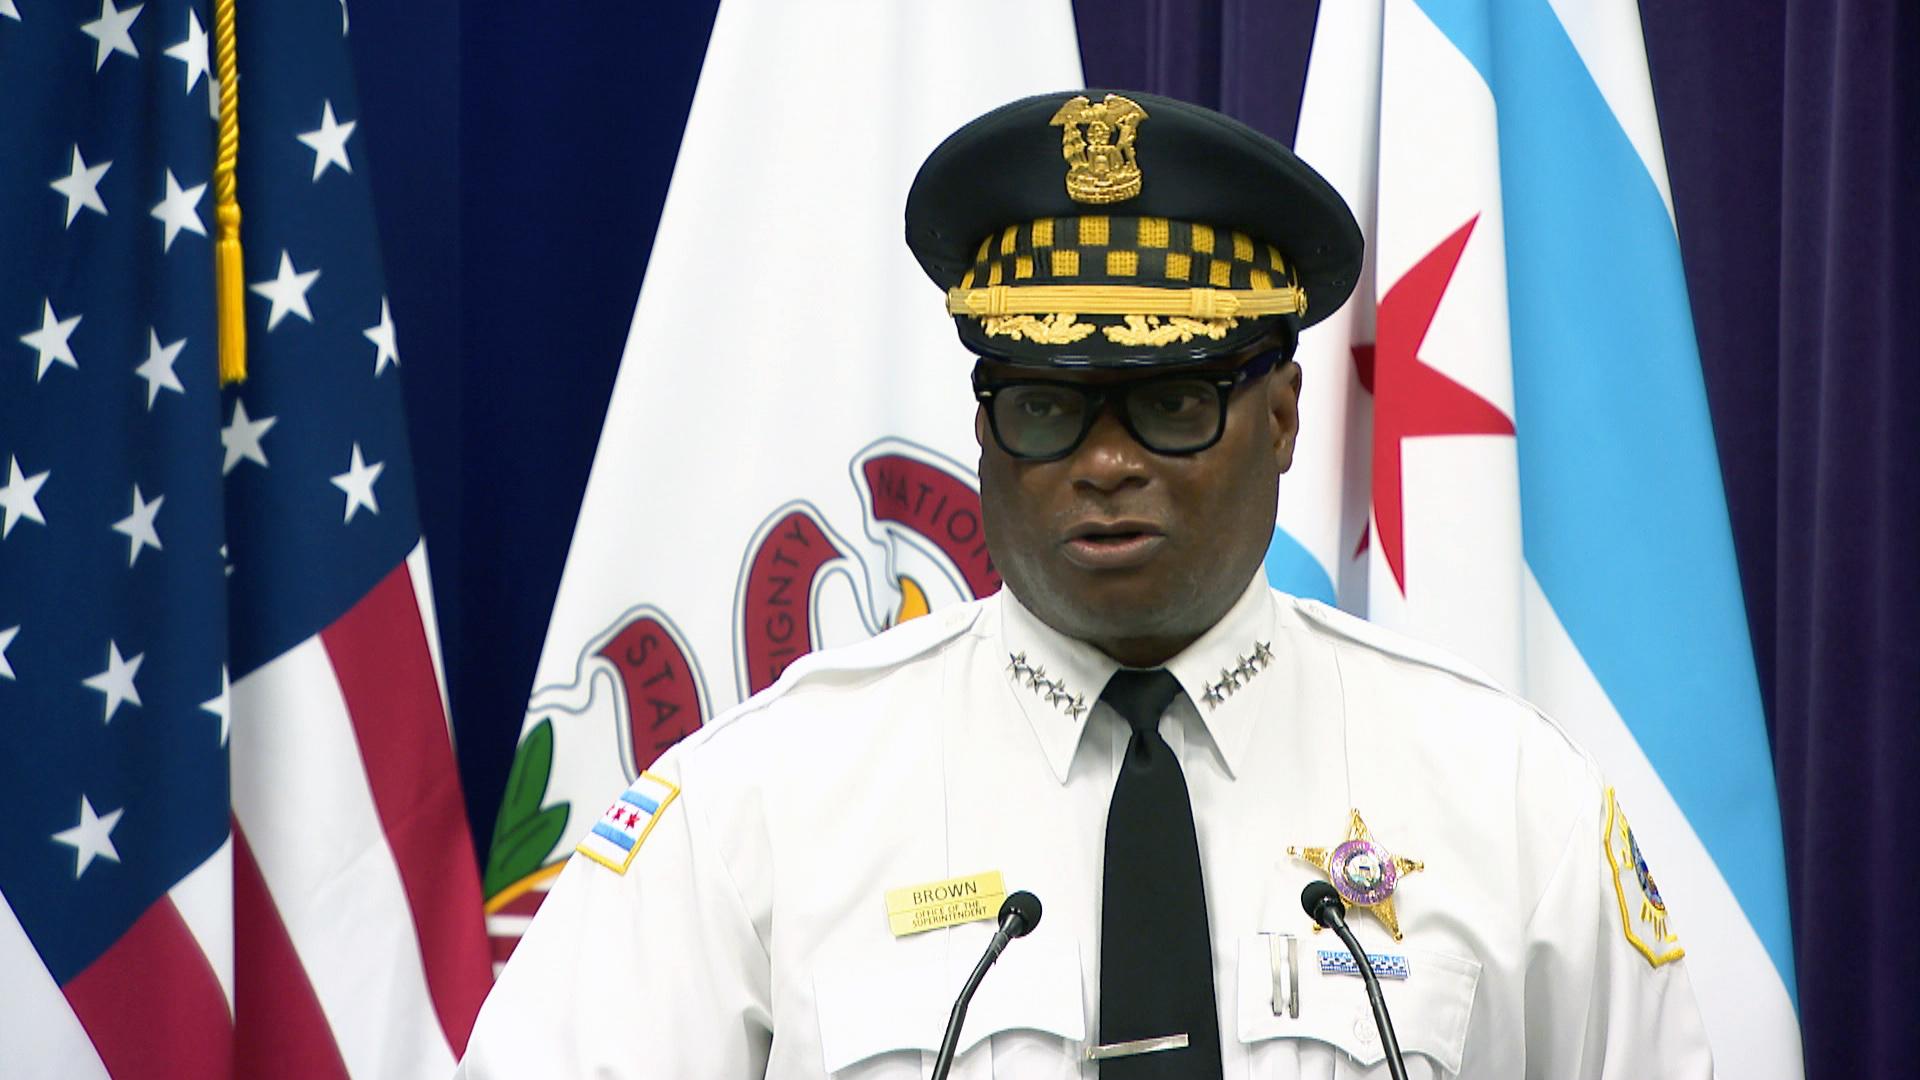 Police Superintendent David Brown talks about the city’s efforts to reduce gun violence on Monday, July 26, 2021. (WTTW News)